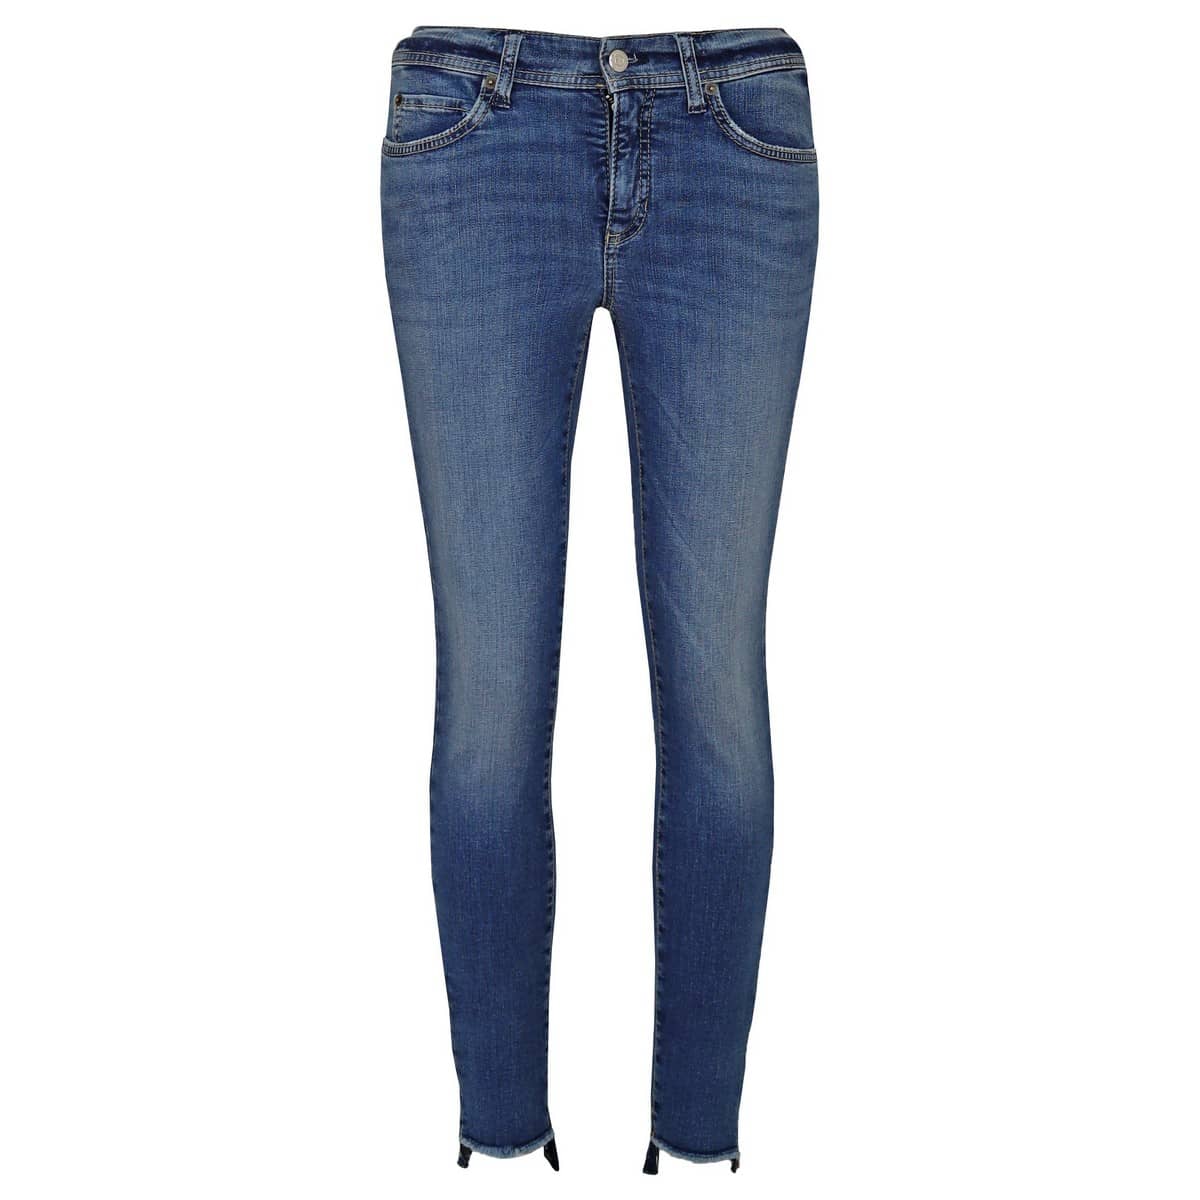 Cambio Jeans • blauwe Parla Zip stepped hem • shop BollyWolly